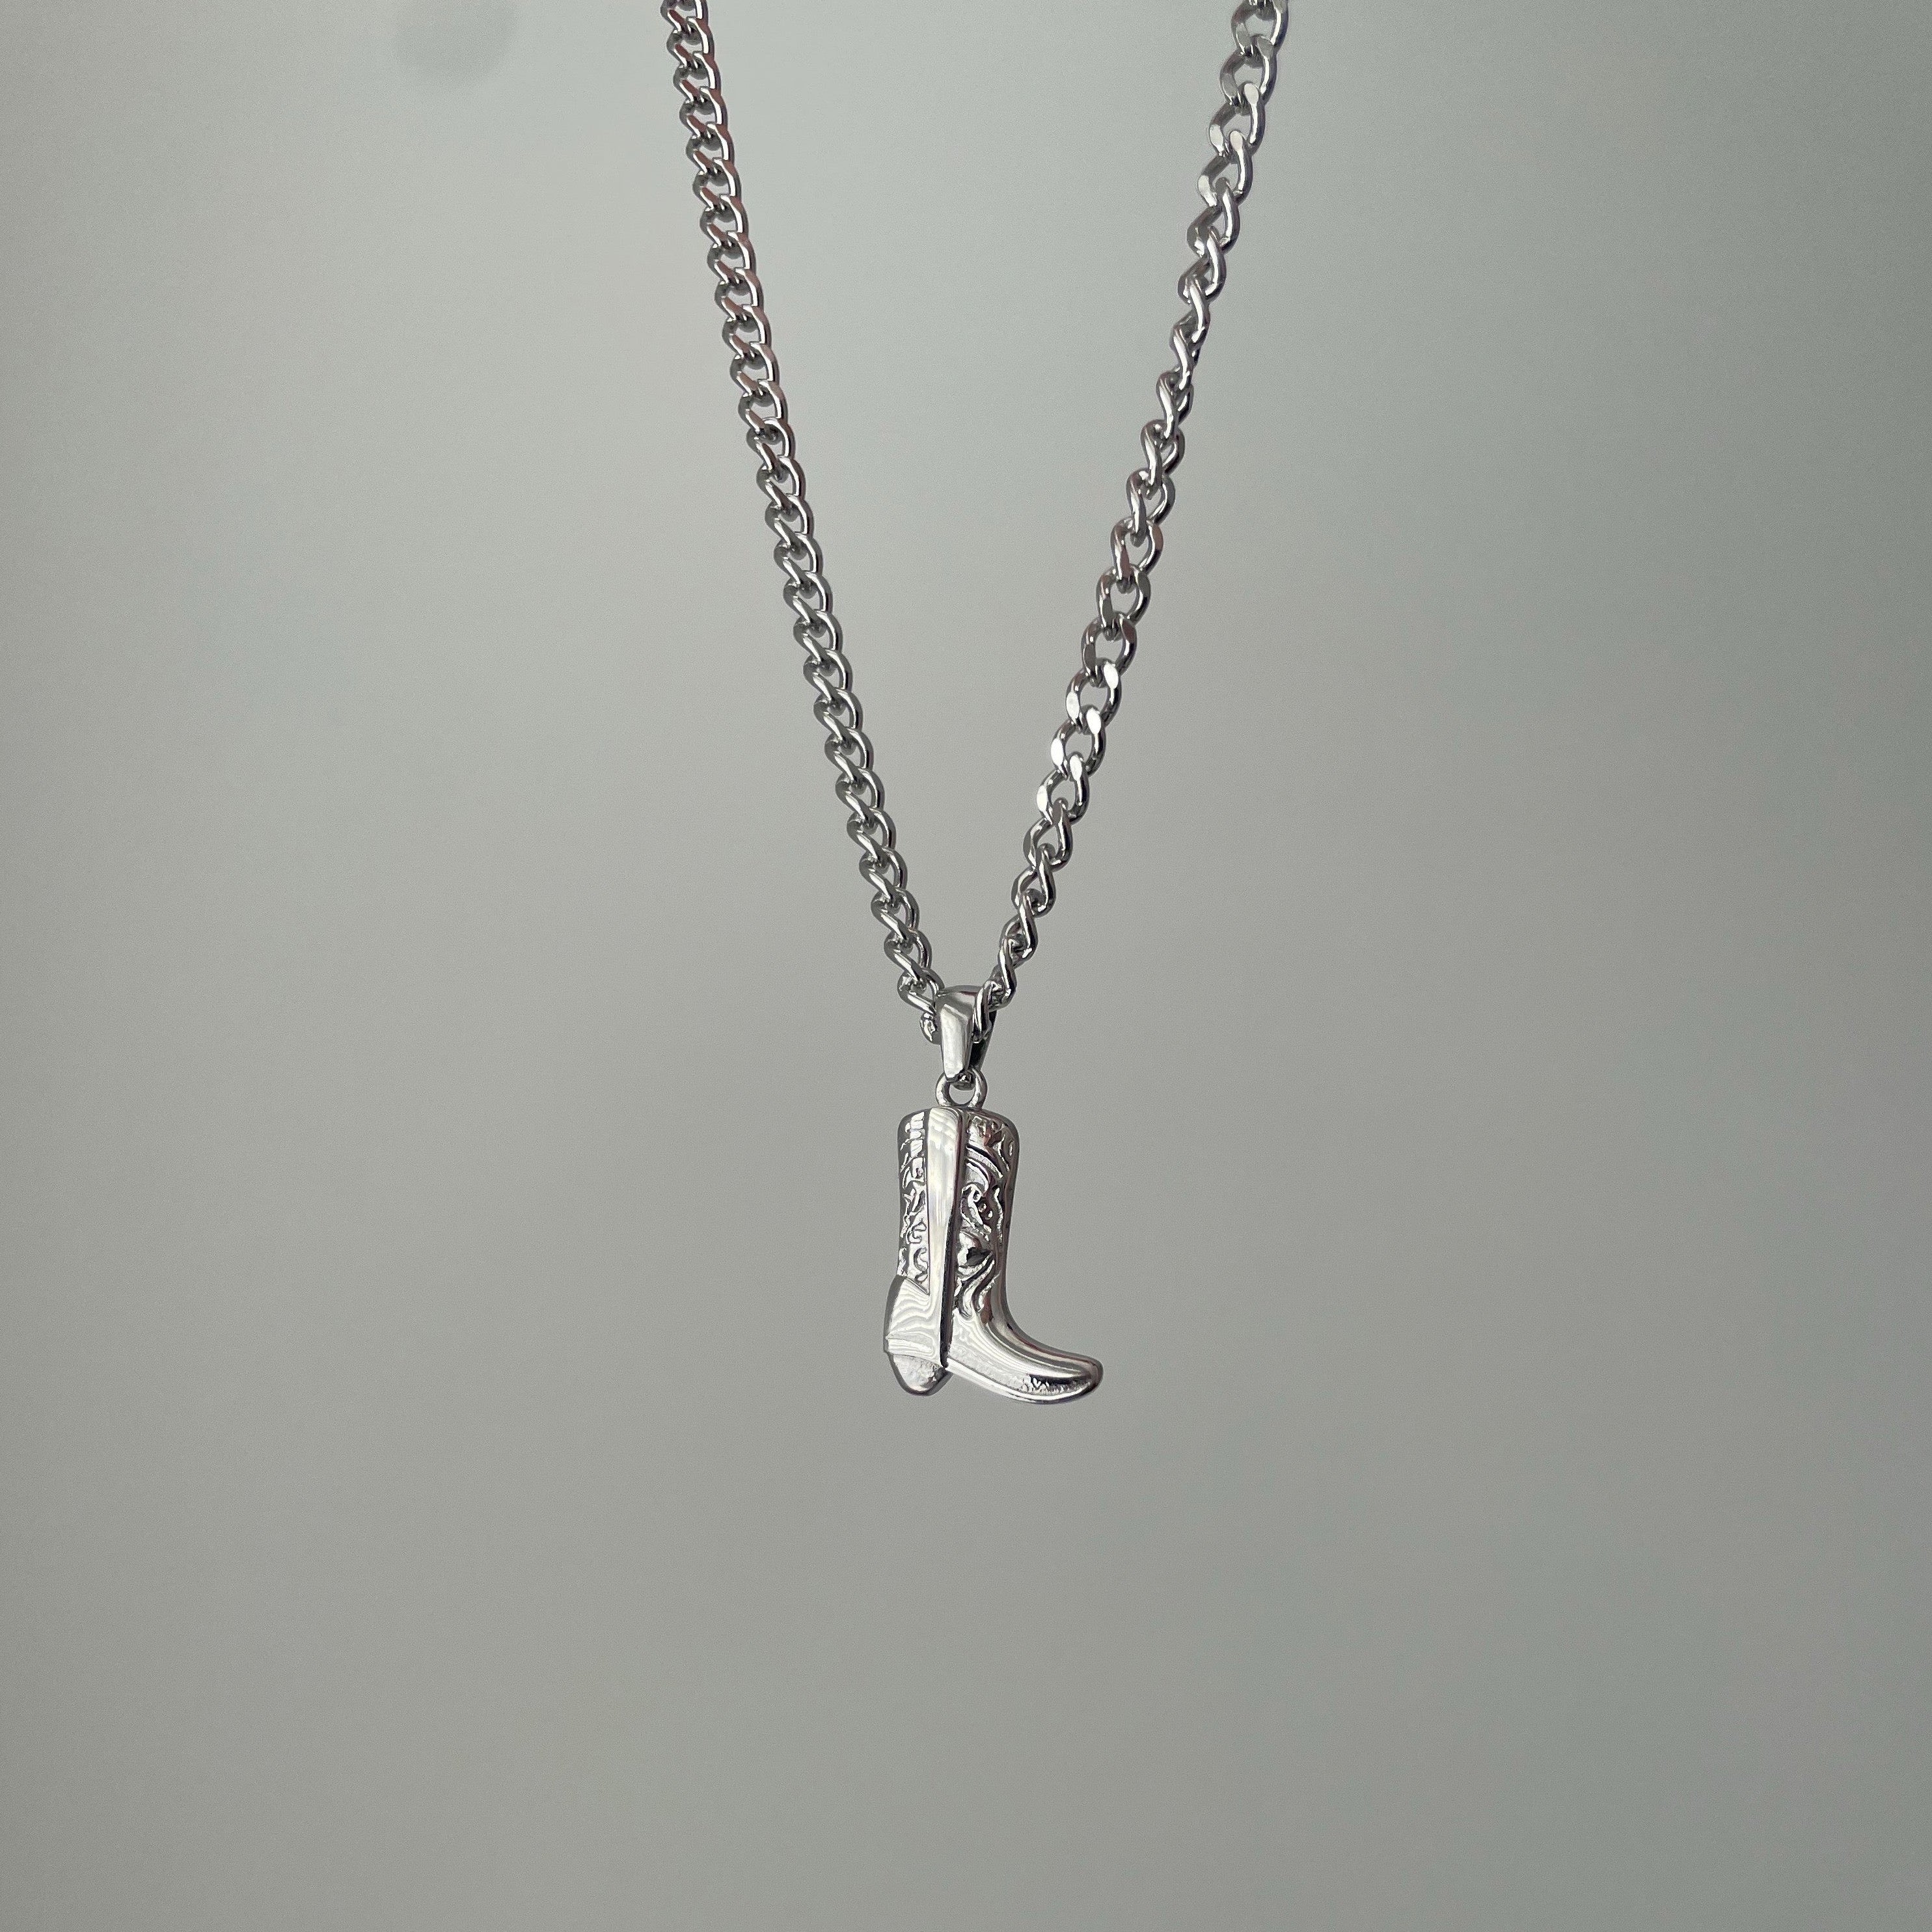 Cowboy Boot Accent Necklace - Western Fashion Accessory